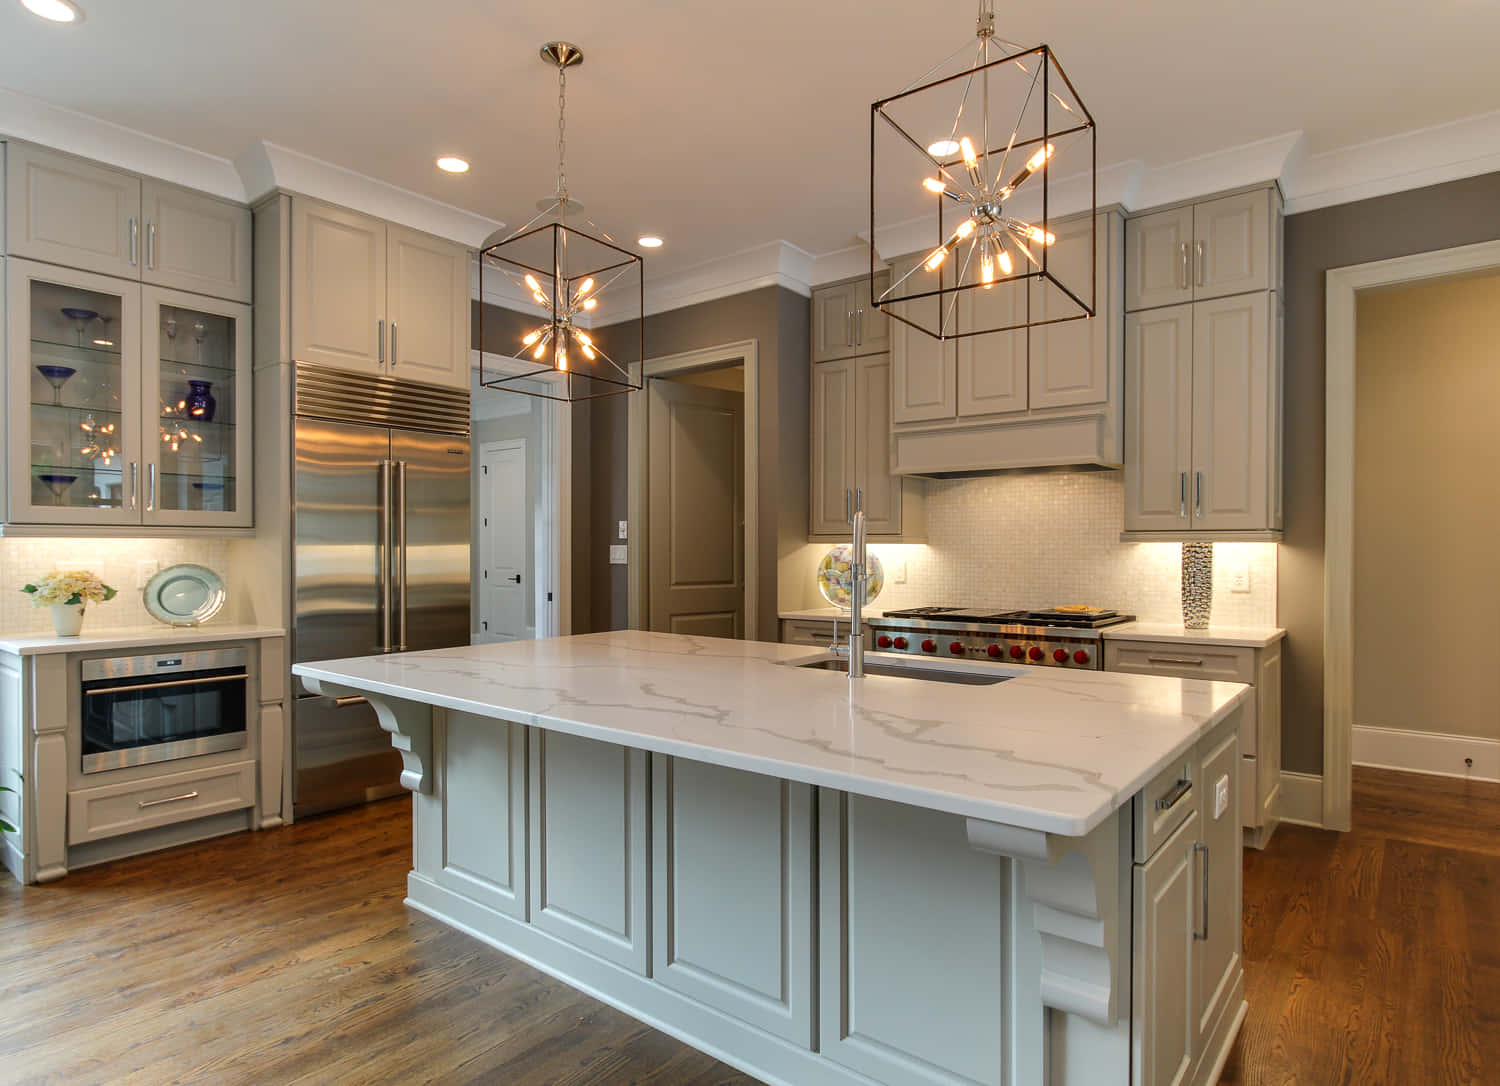 Enhance the Look and Storage of Your Kitchen with Cabinetry